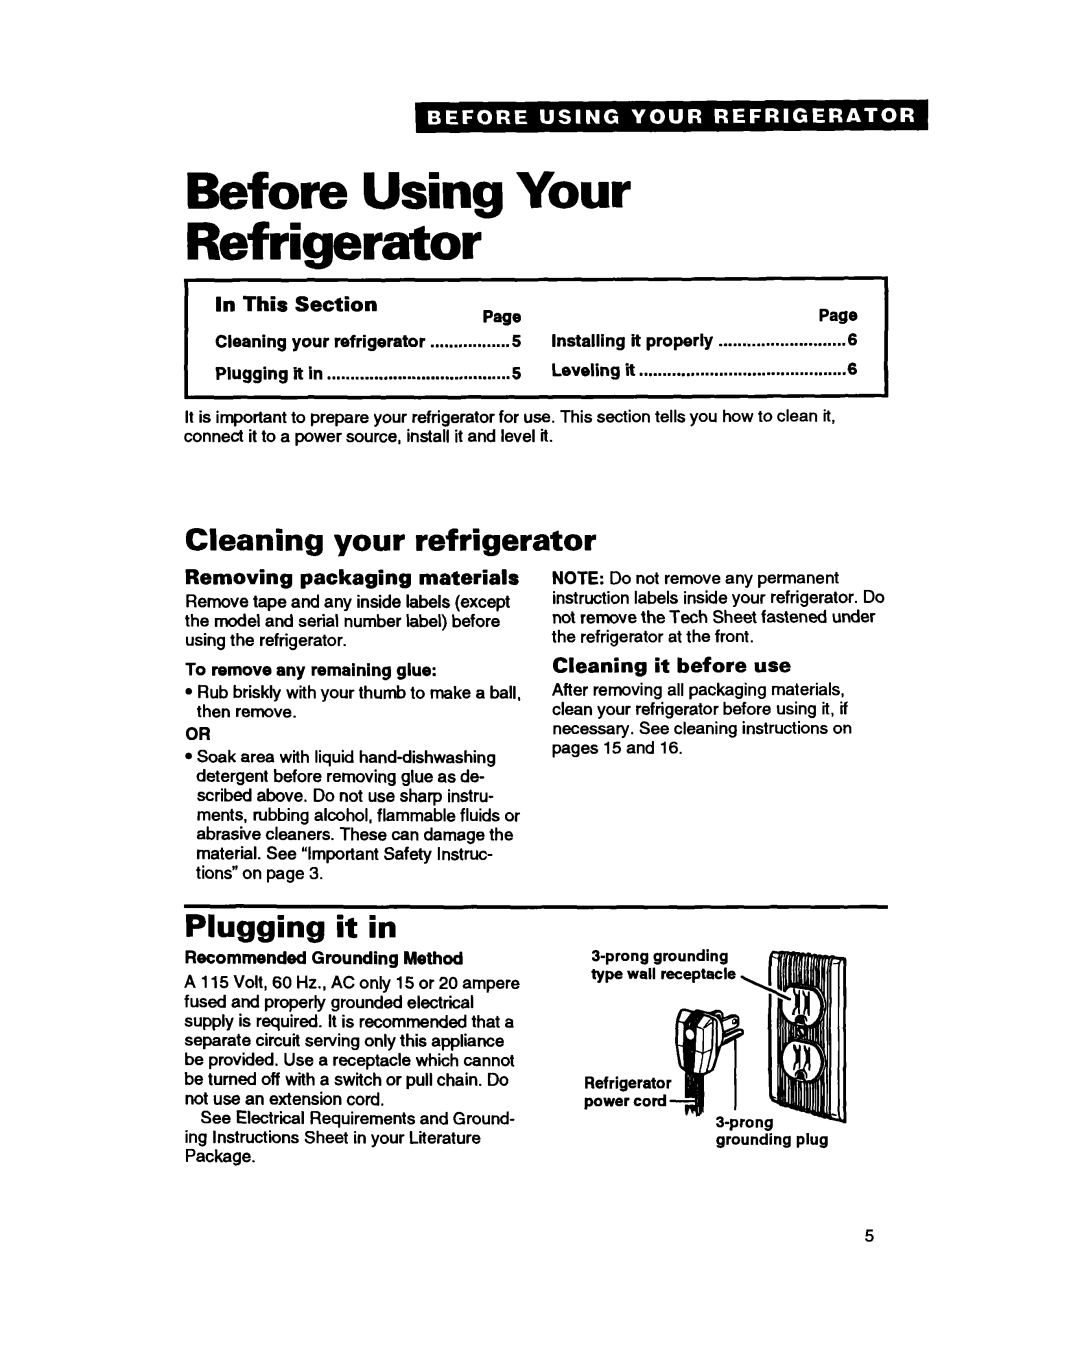 Whirlpool ET18HN warranty Before Using Your Refrigerator, Cleaning your refrigerator, Plugging it in, In This, Section 